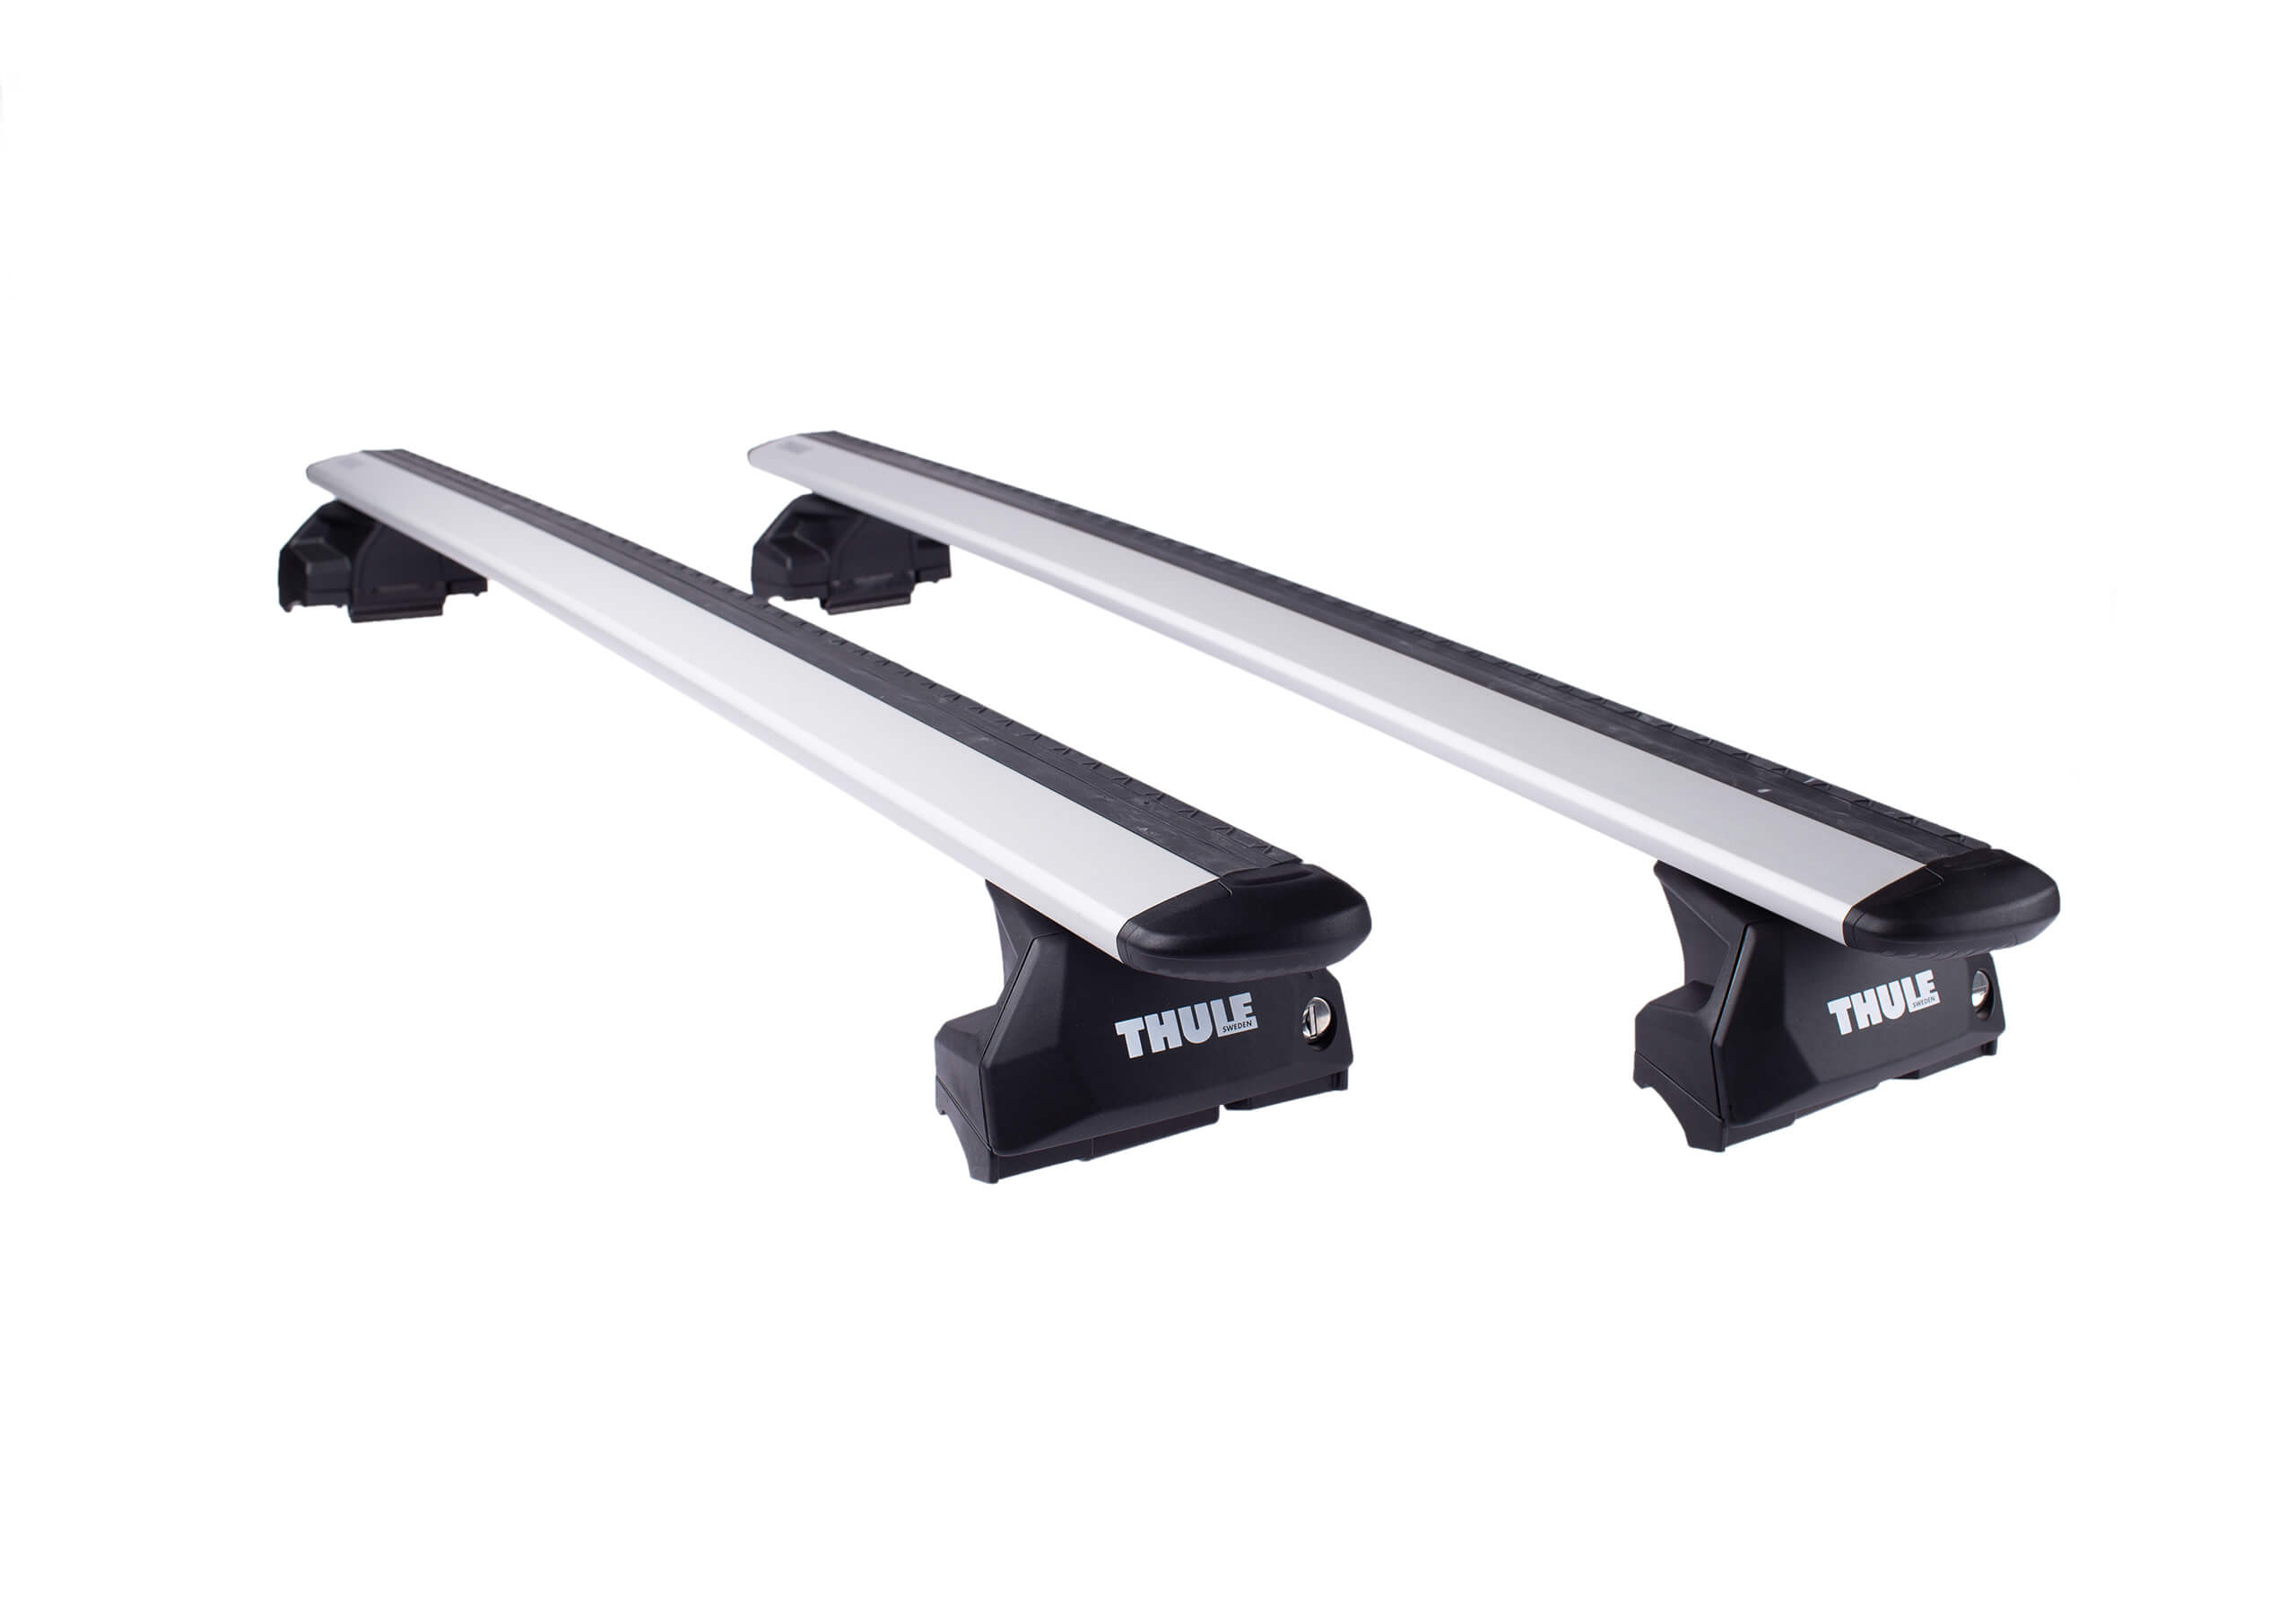 Audi Q7 (2006 to 2015):Thule silver Evo WingBars package - 7106, 7112, 6025